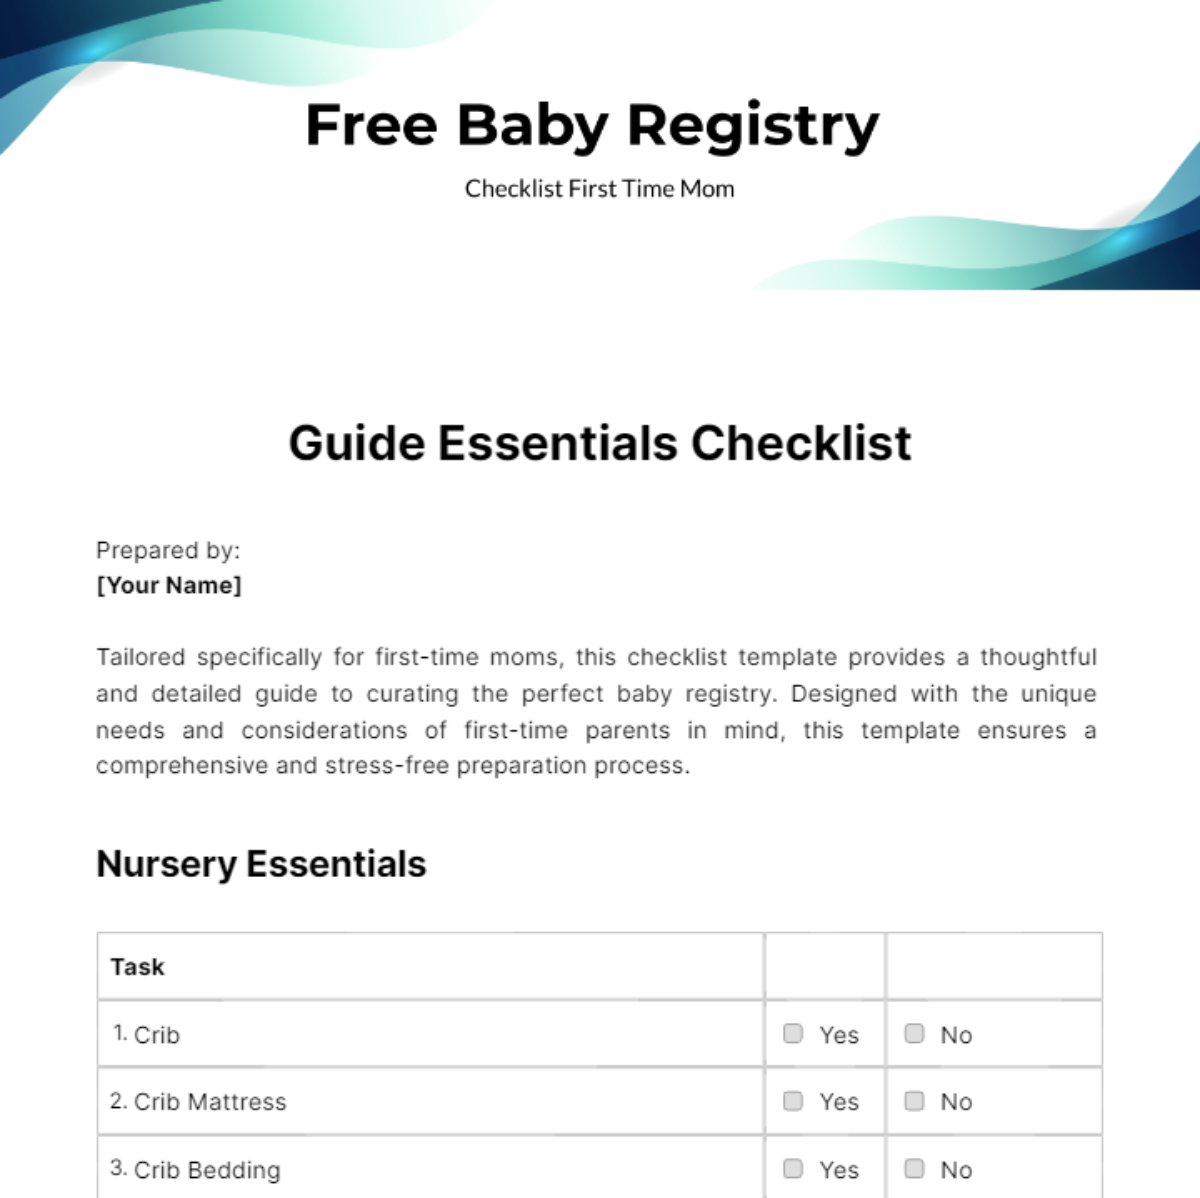 Free Baby Registry Checklist First Time Mom Template